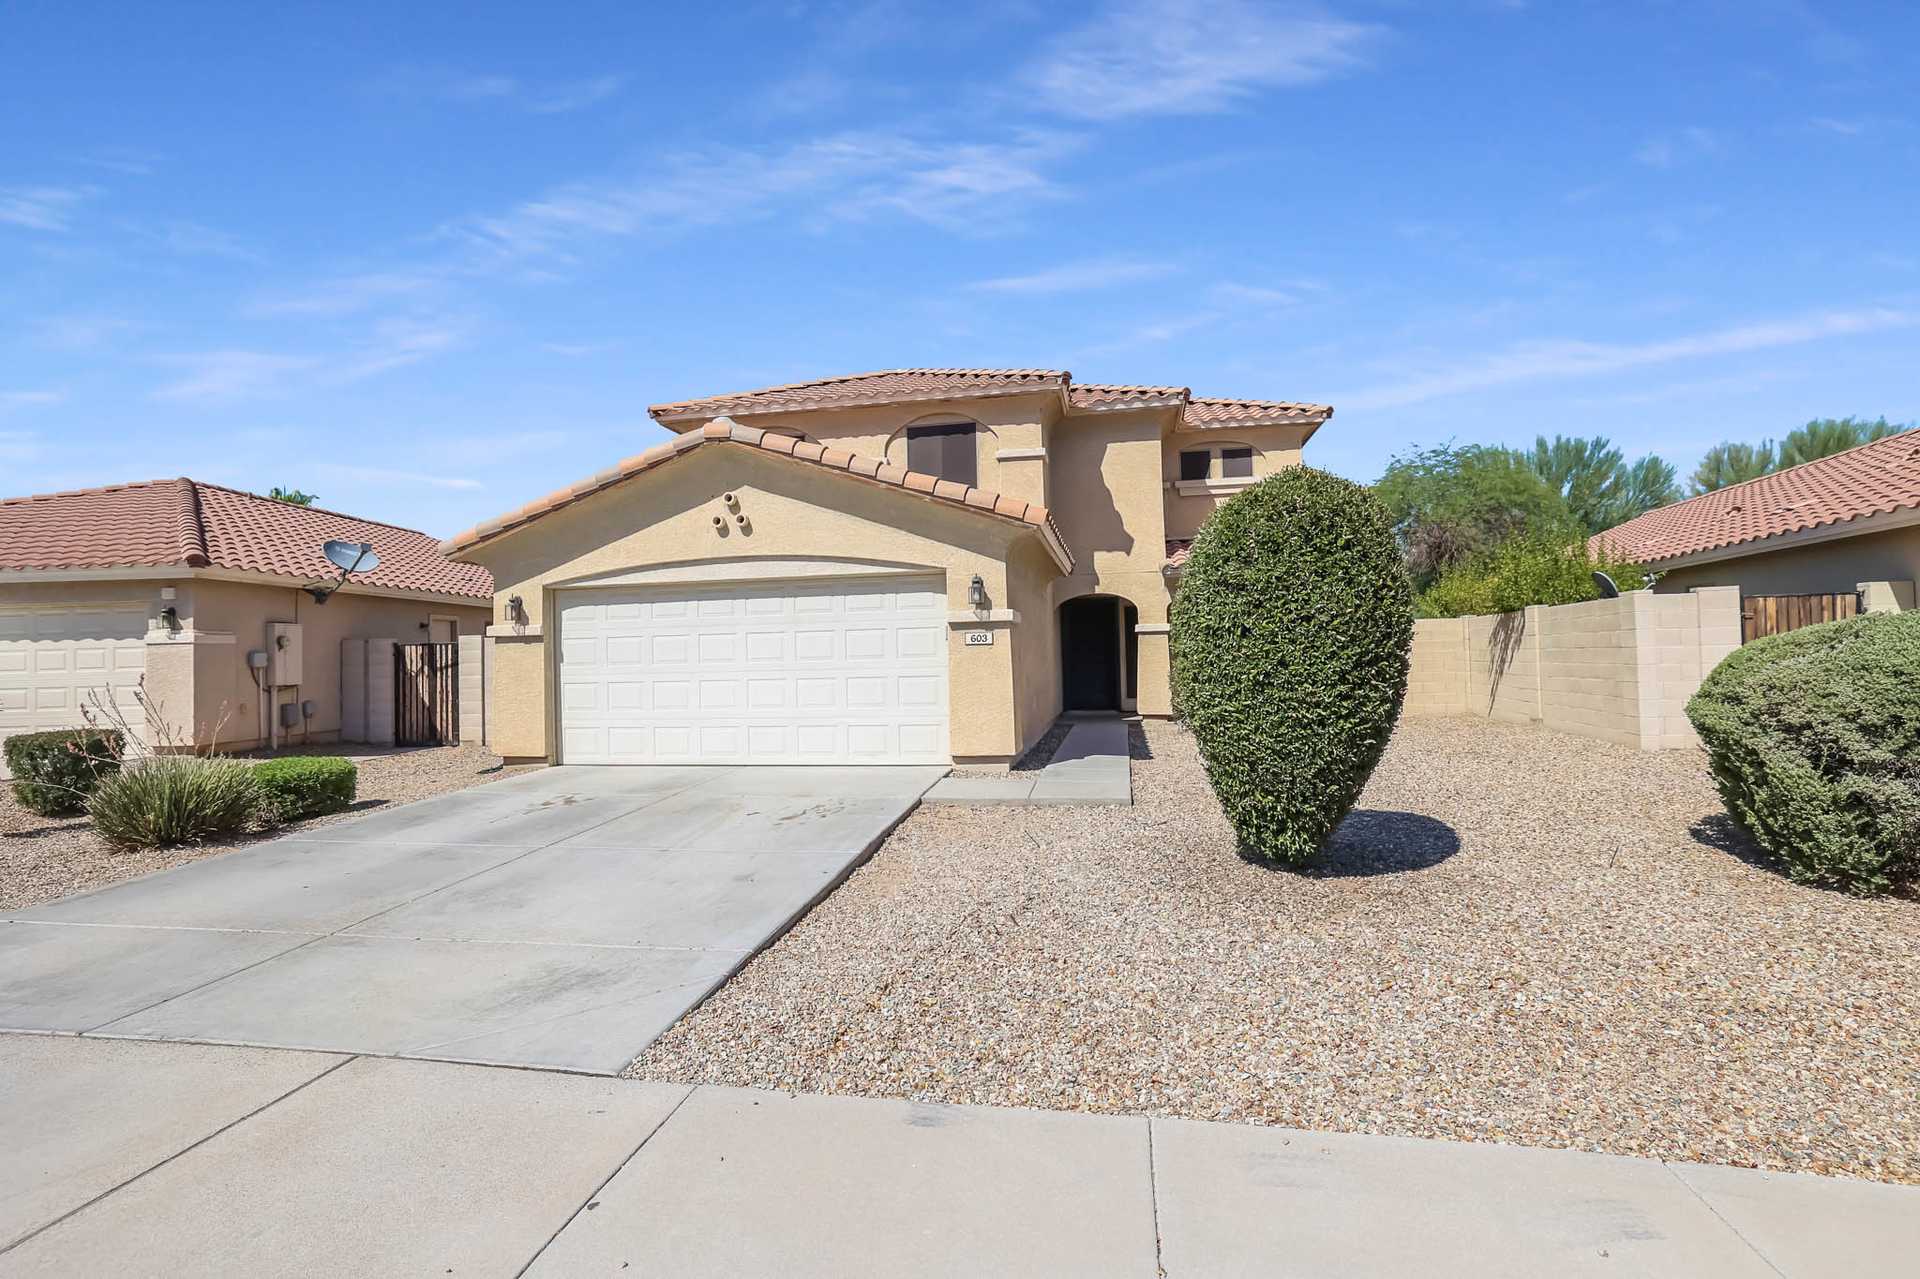 House in Perryville, Arizona 10854233